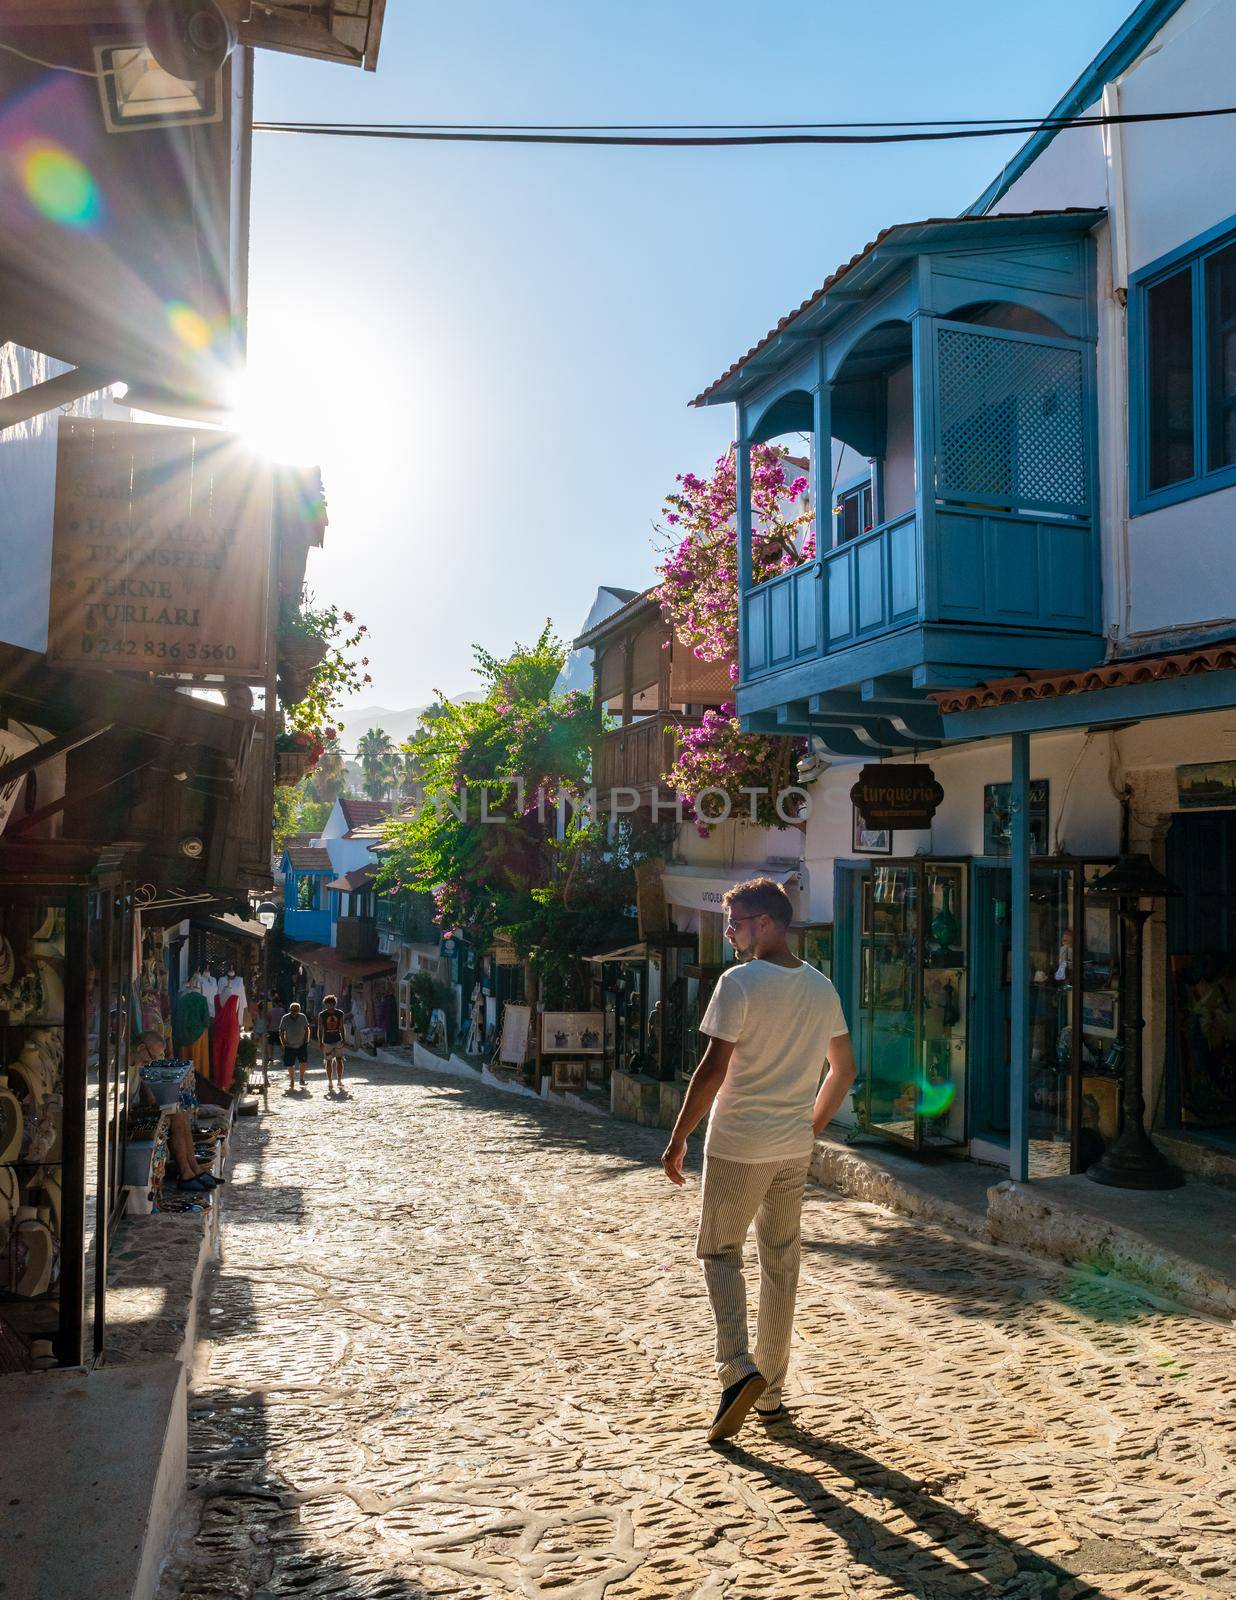 Kas Antalya Turkey July 2018, a colorful house on the narrow Streets of the old center with many restaurants.